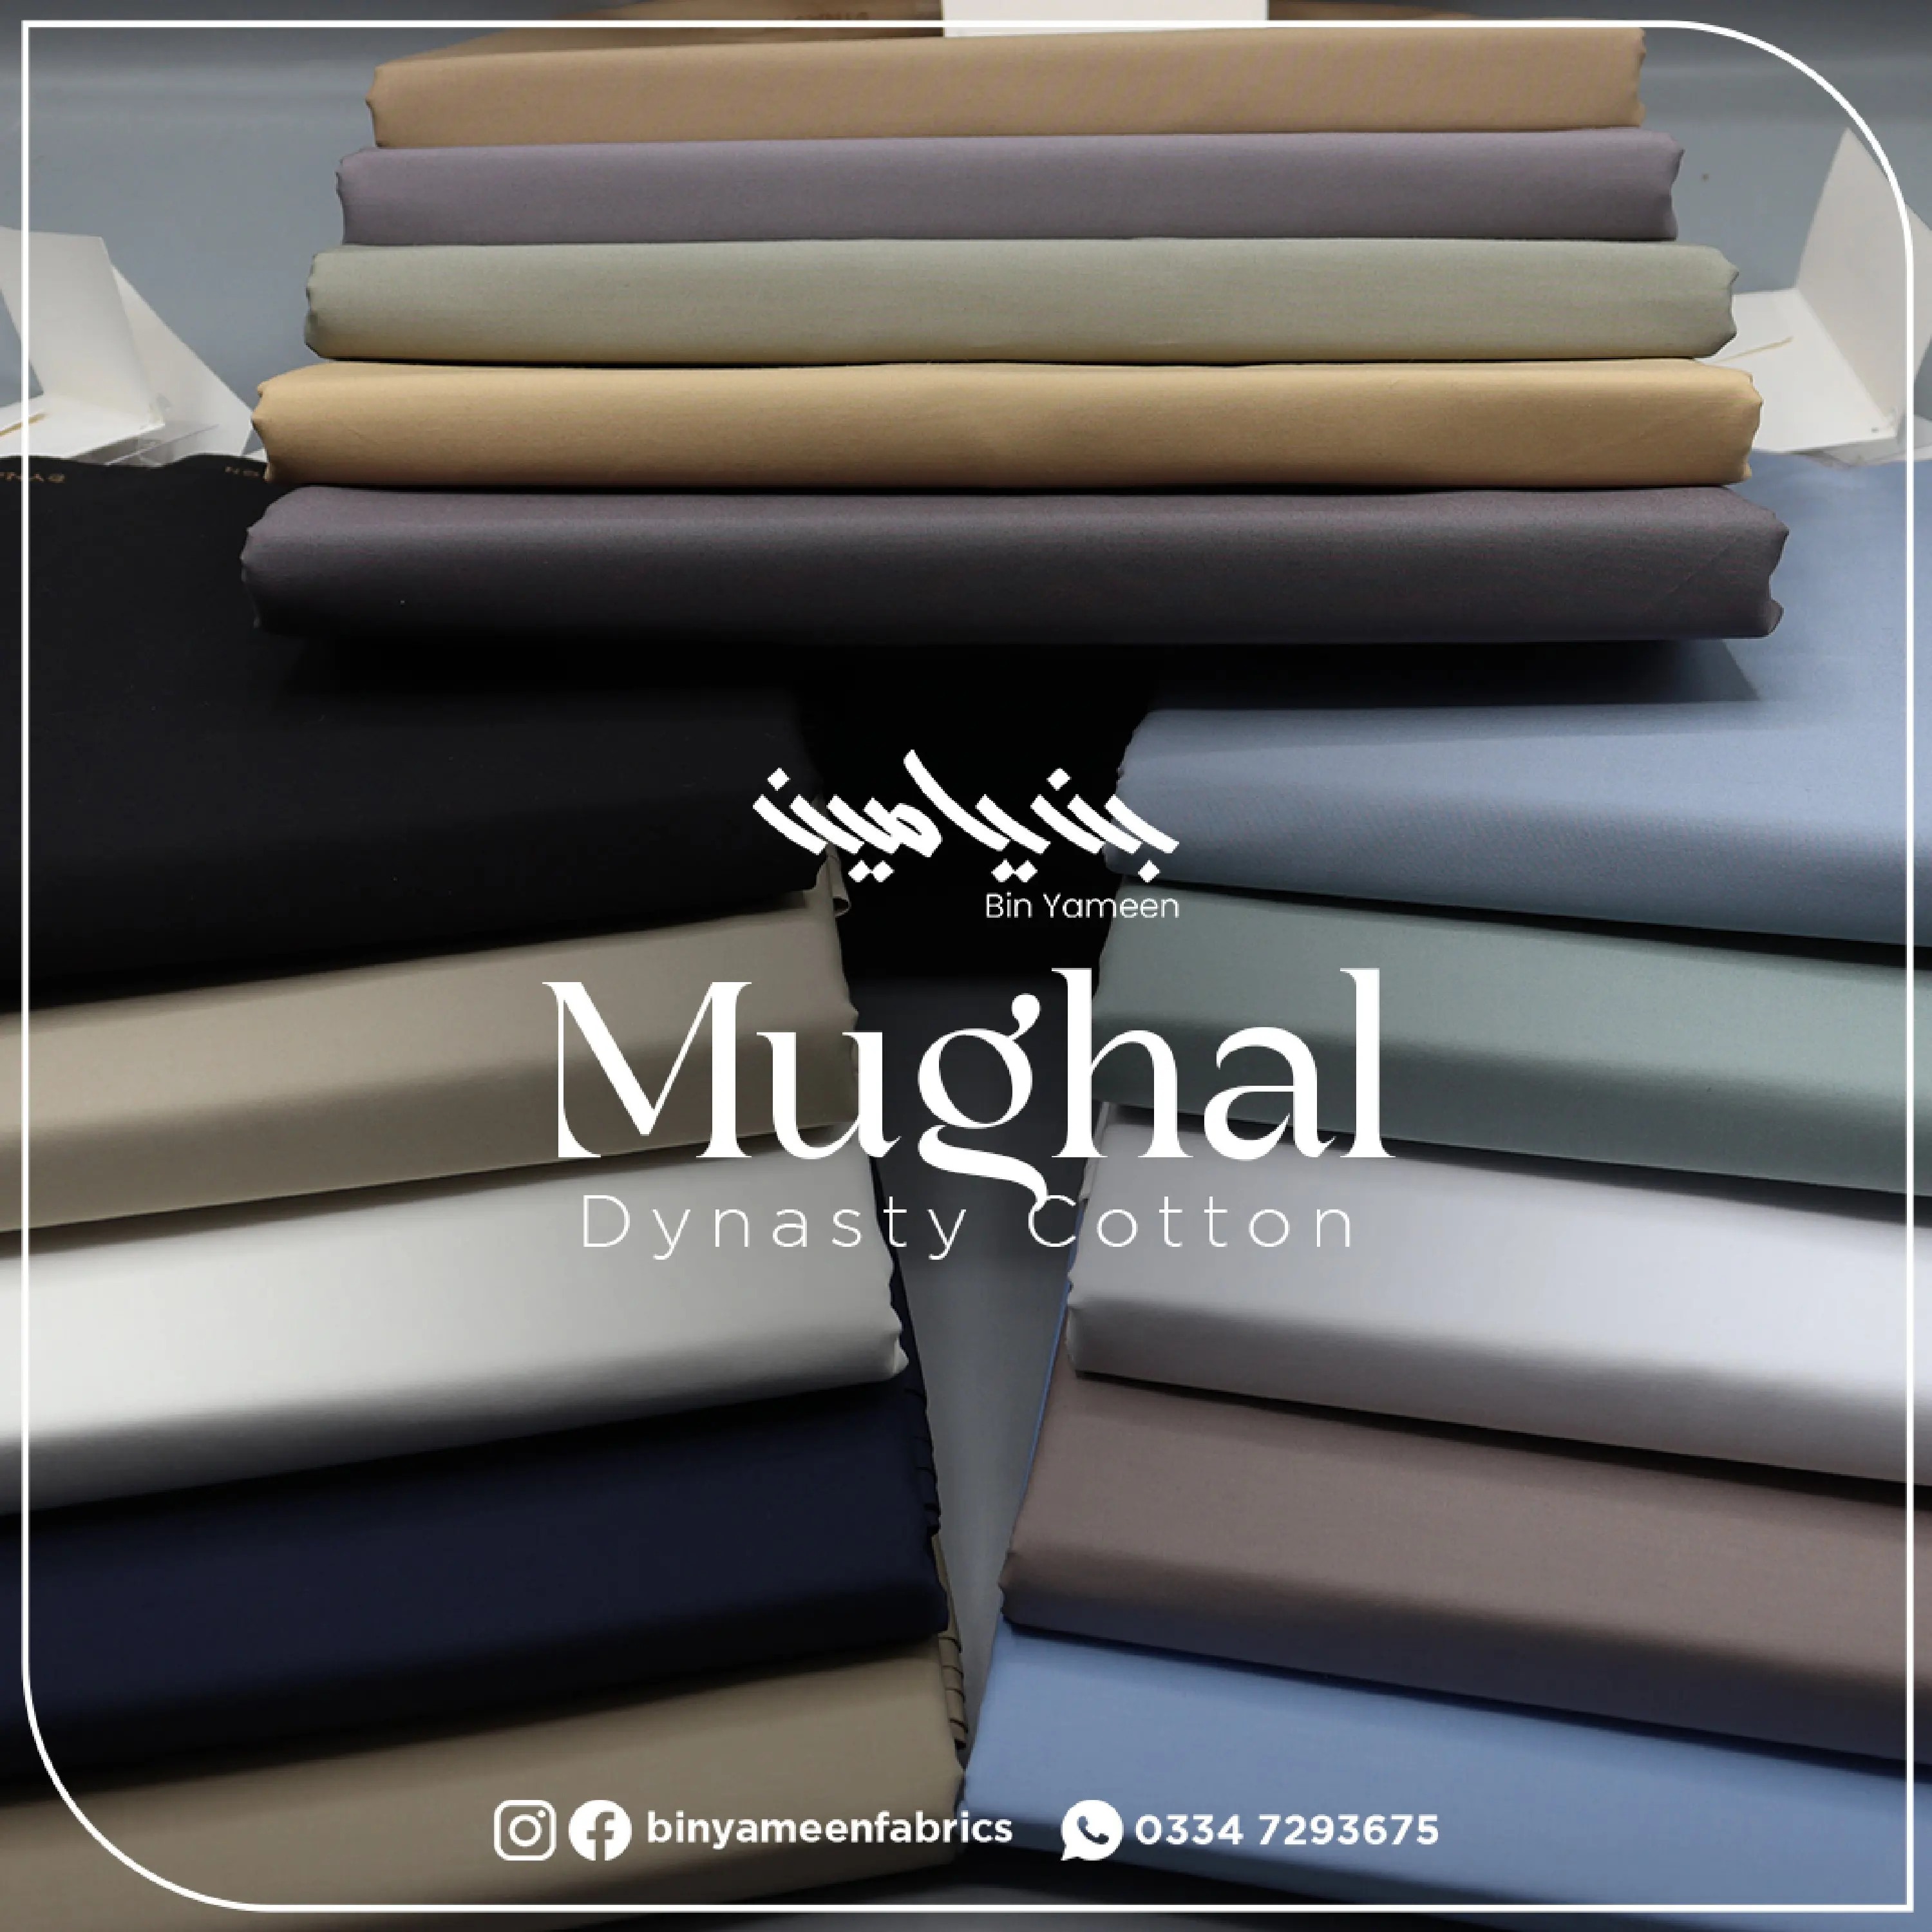 Bin Yameen Mughal Dynasty Cotton Collection - BYMDCC